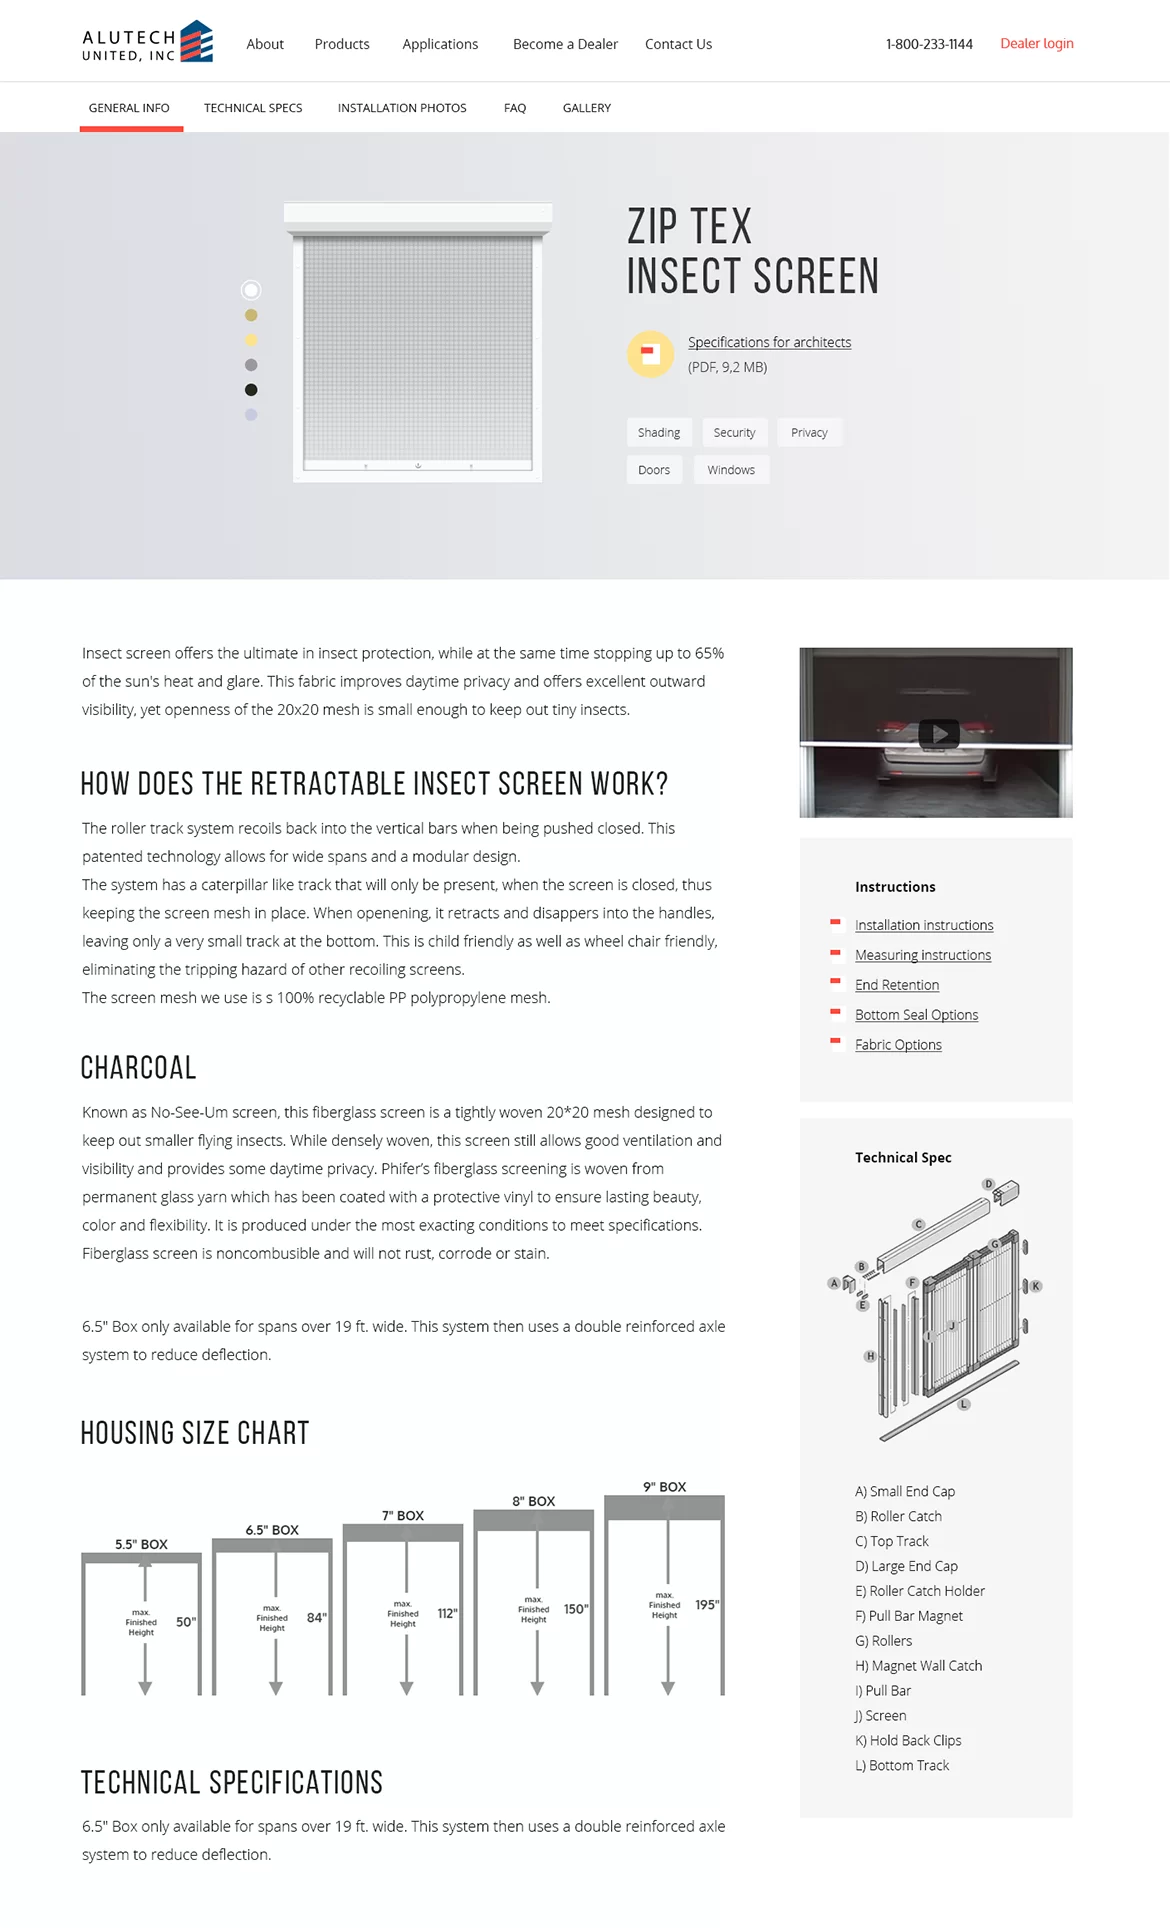 05_Alutech_Product_Page